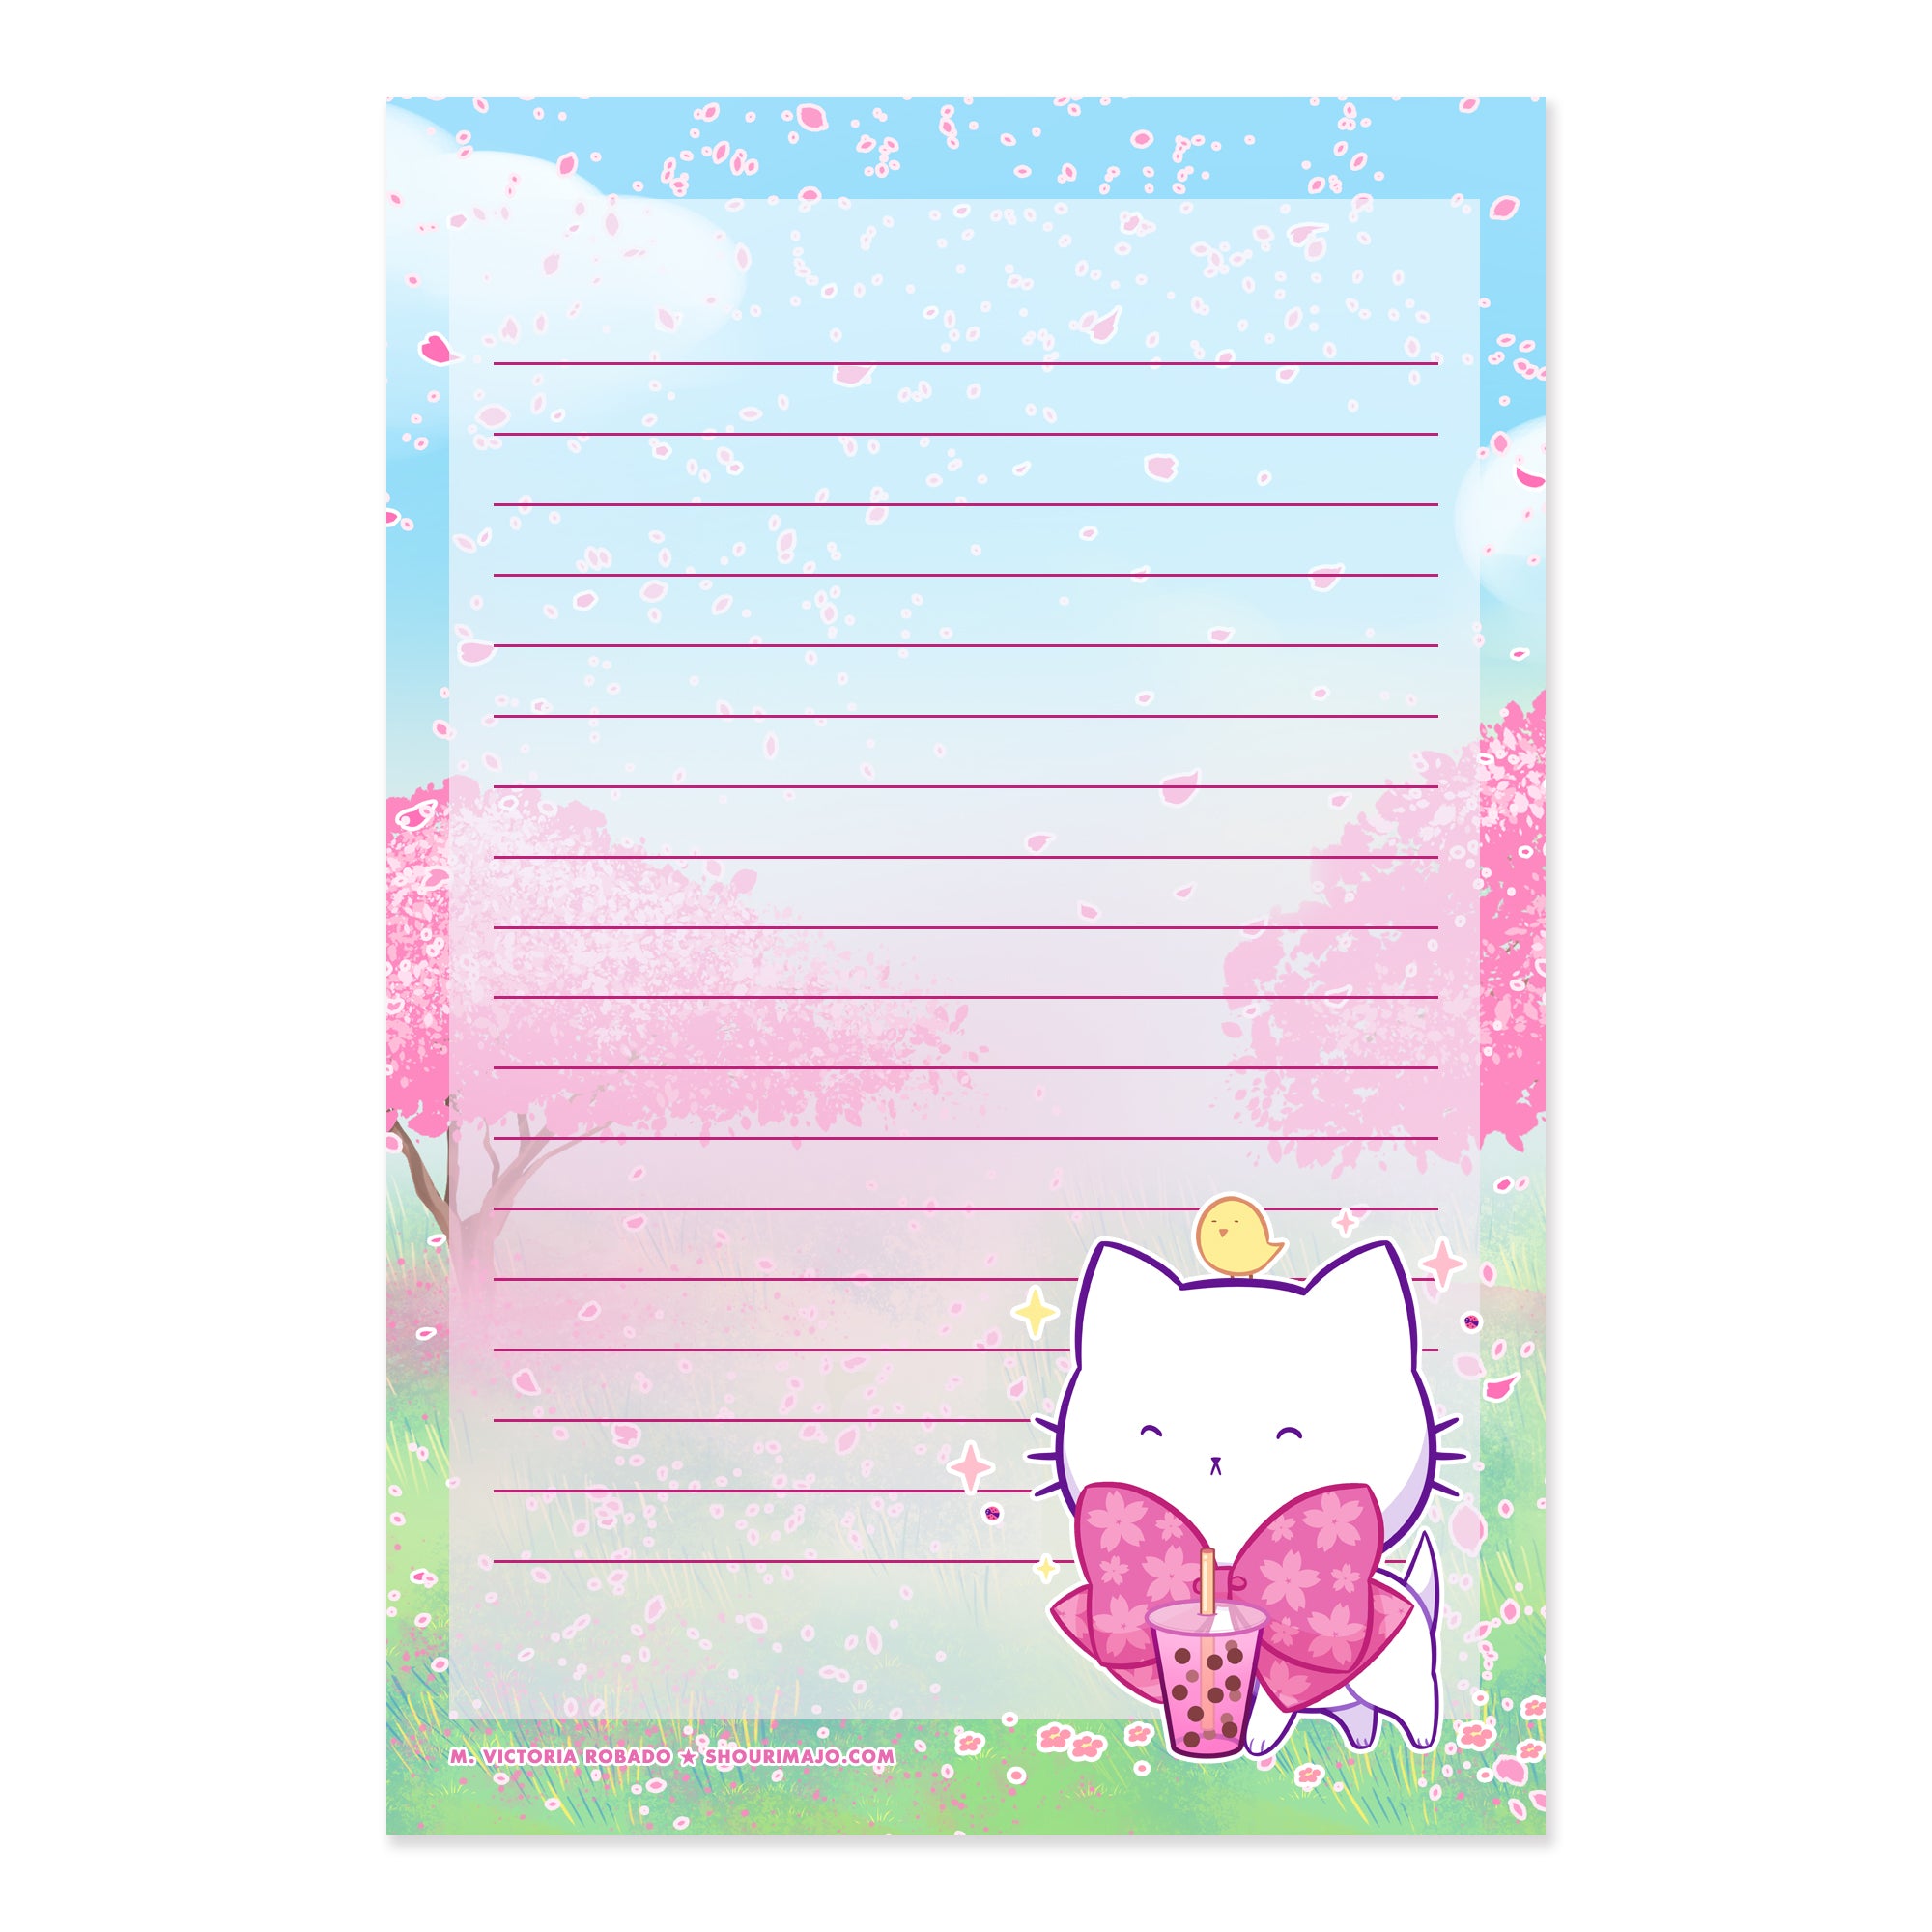 Bubble Kittea Spring Stationery Paper